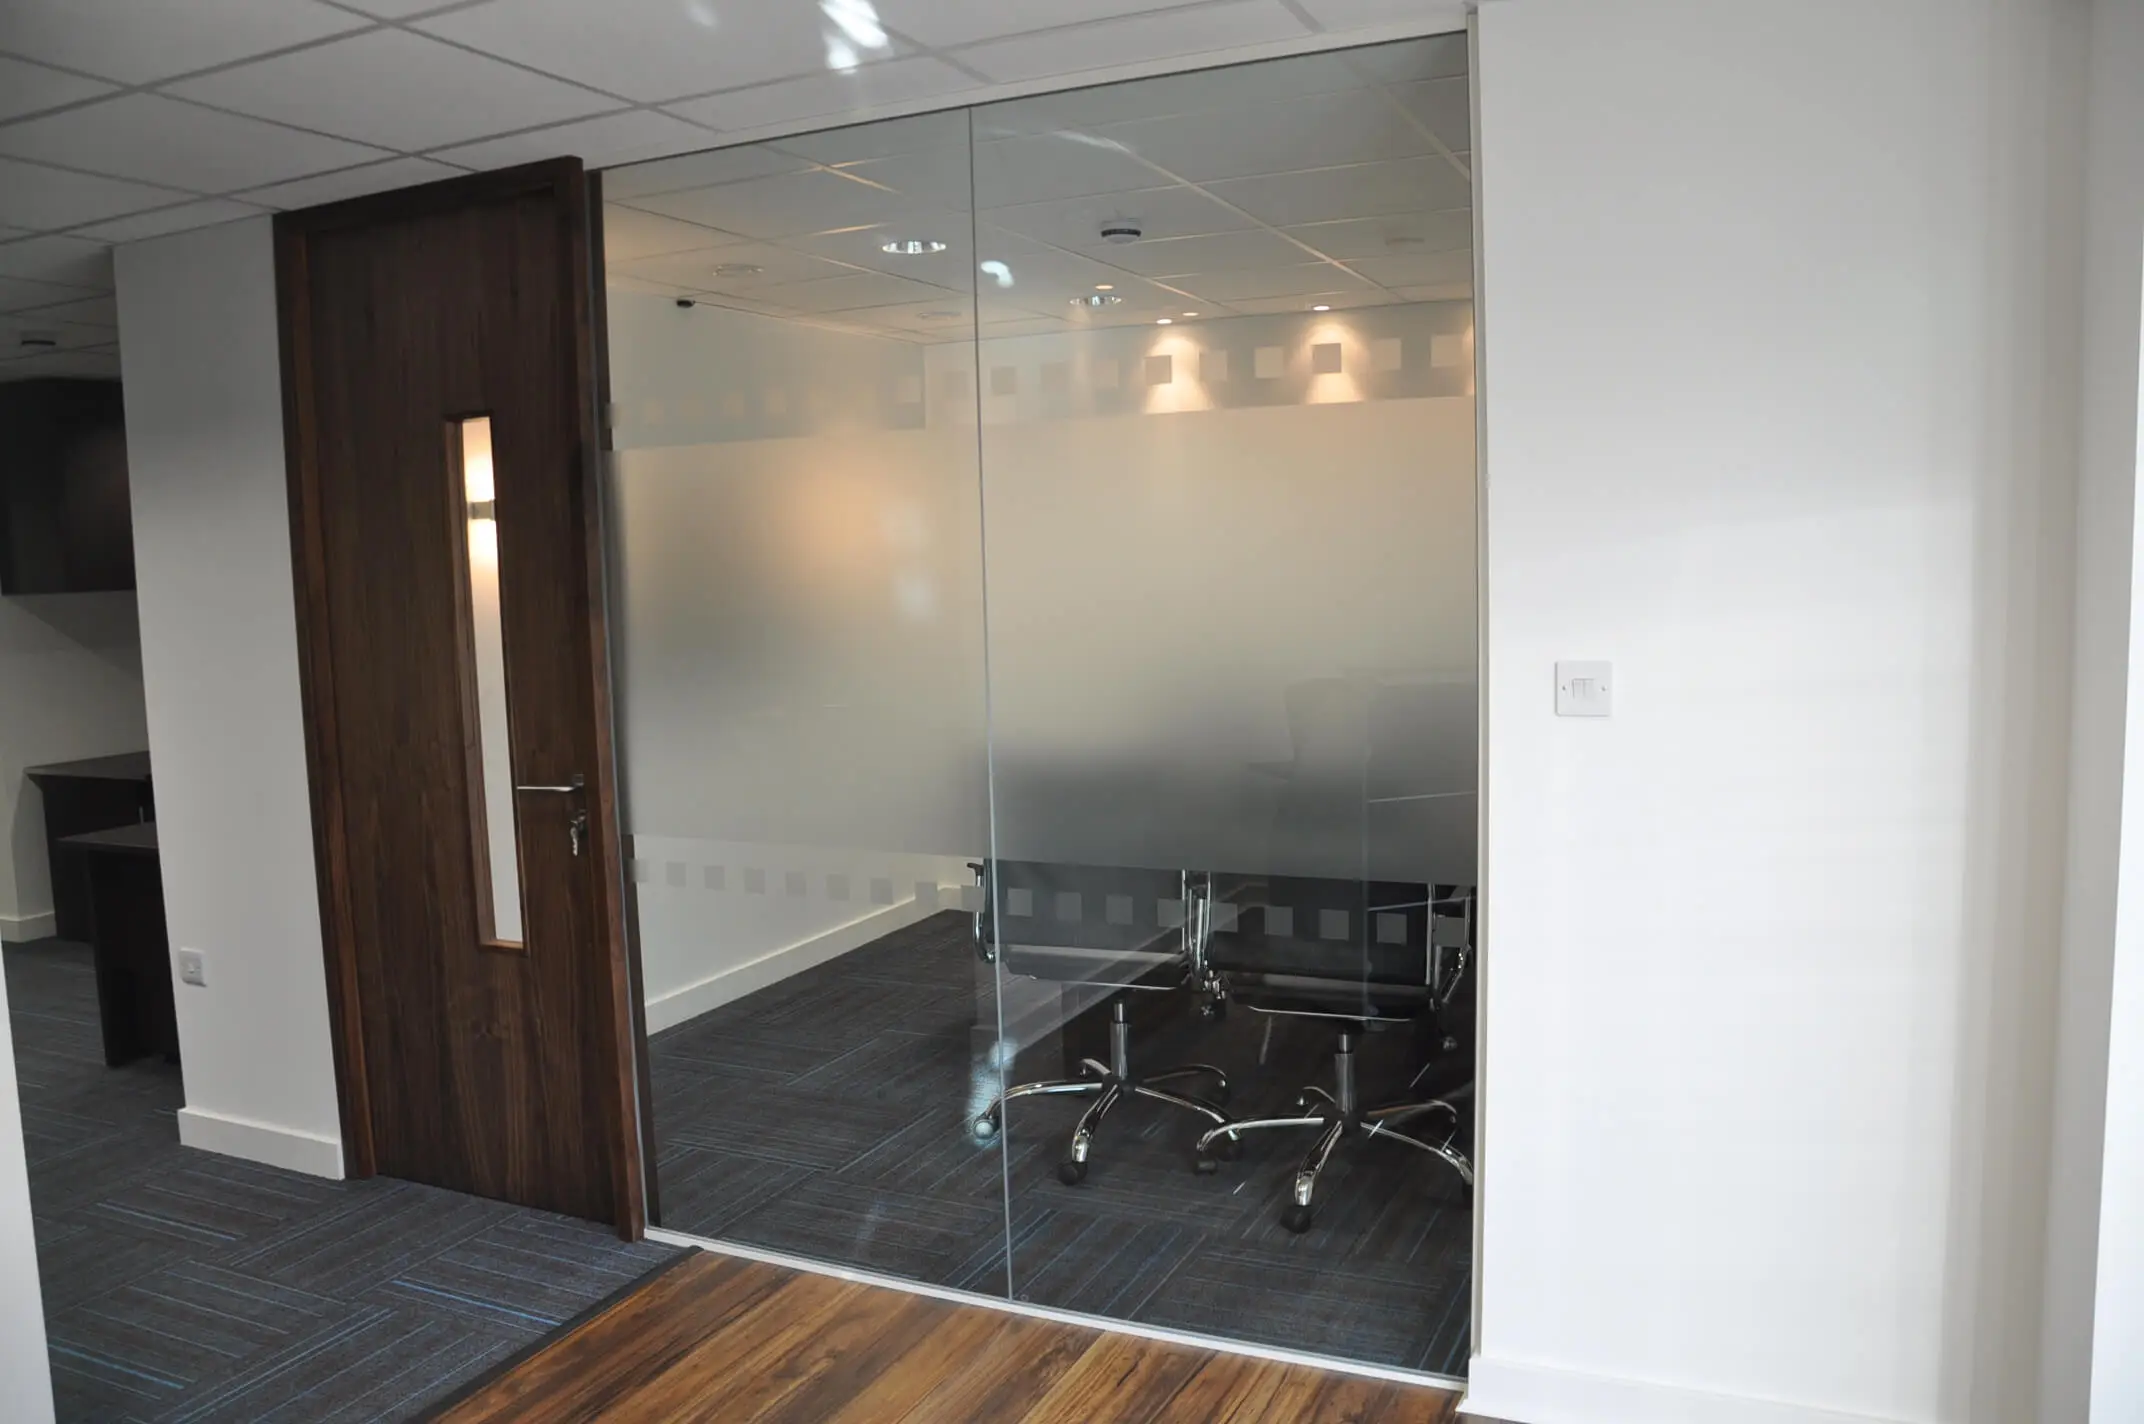 Single glazed manifested glass partitions in office meeting room